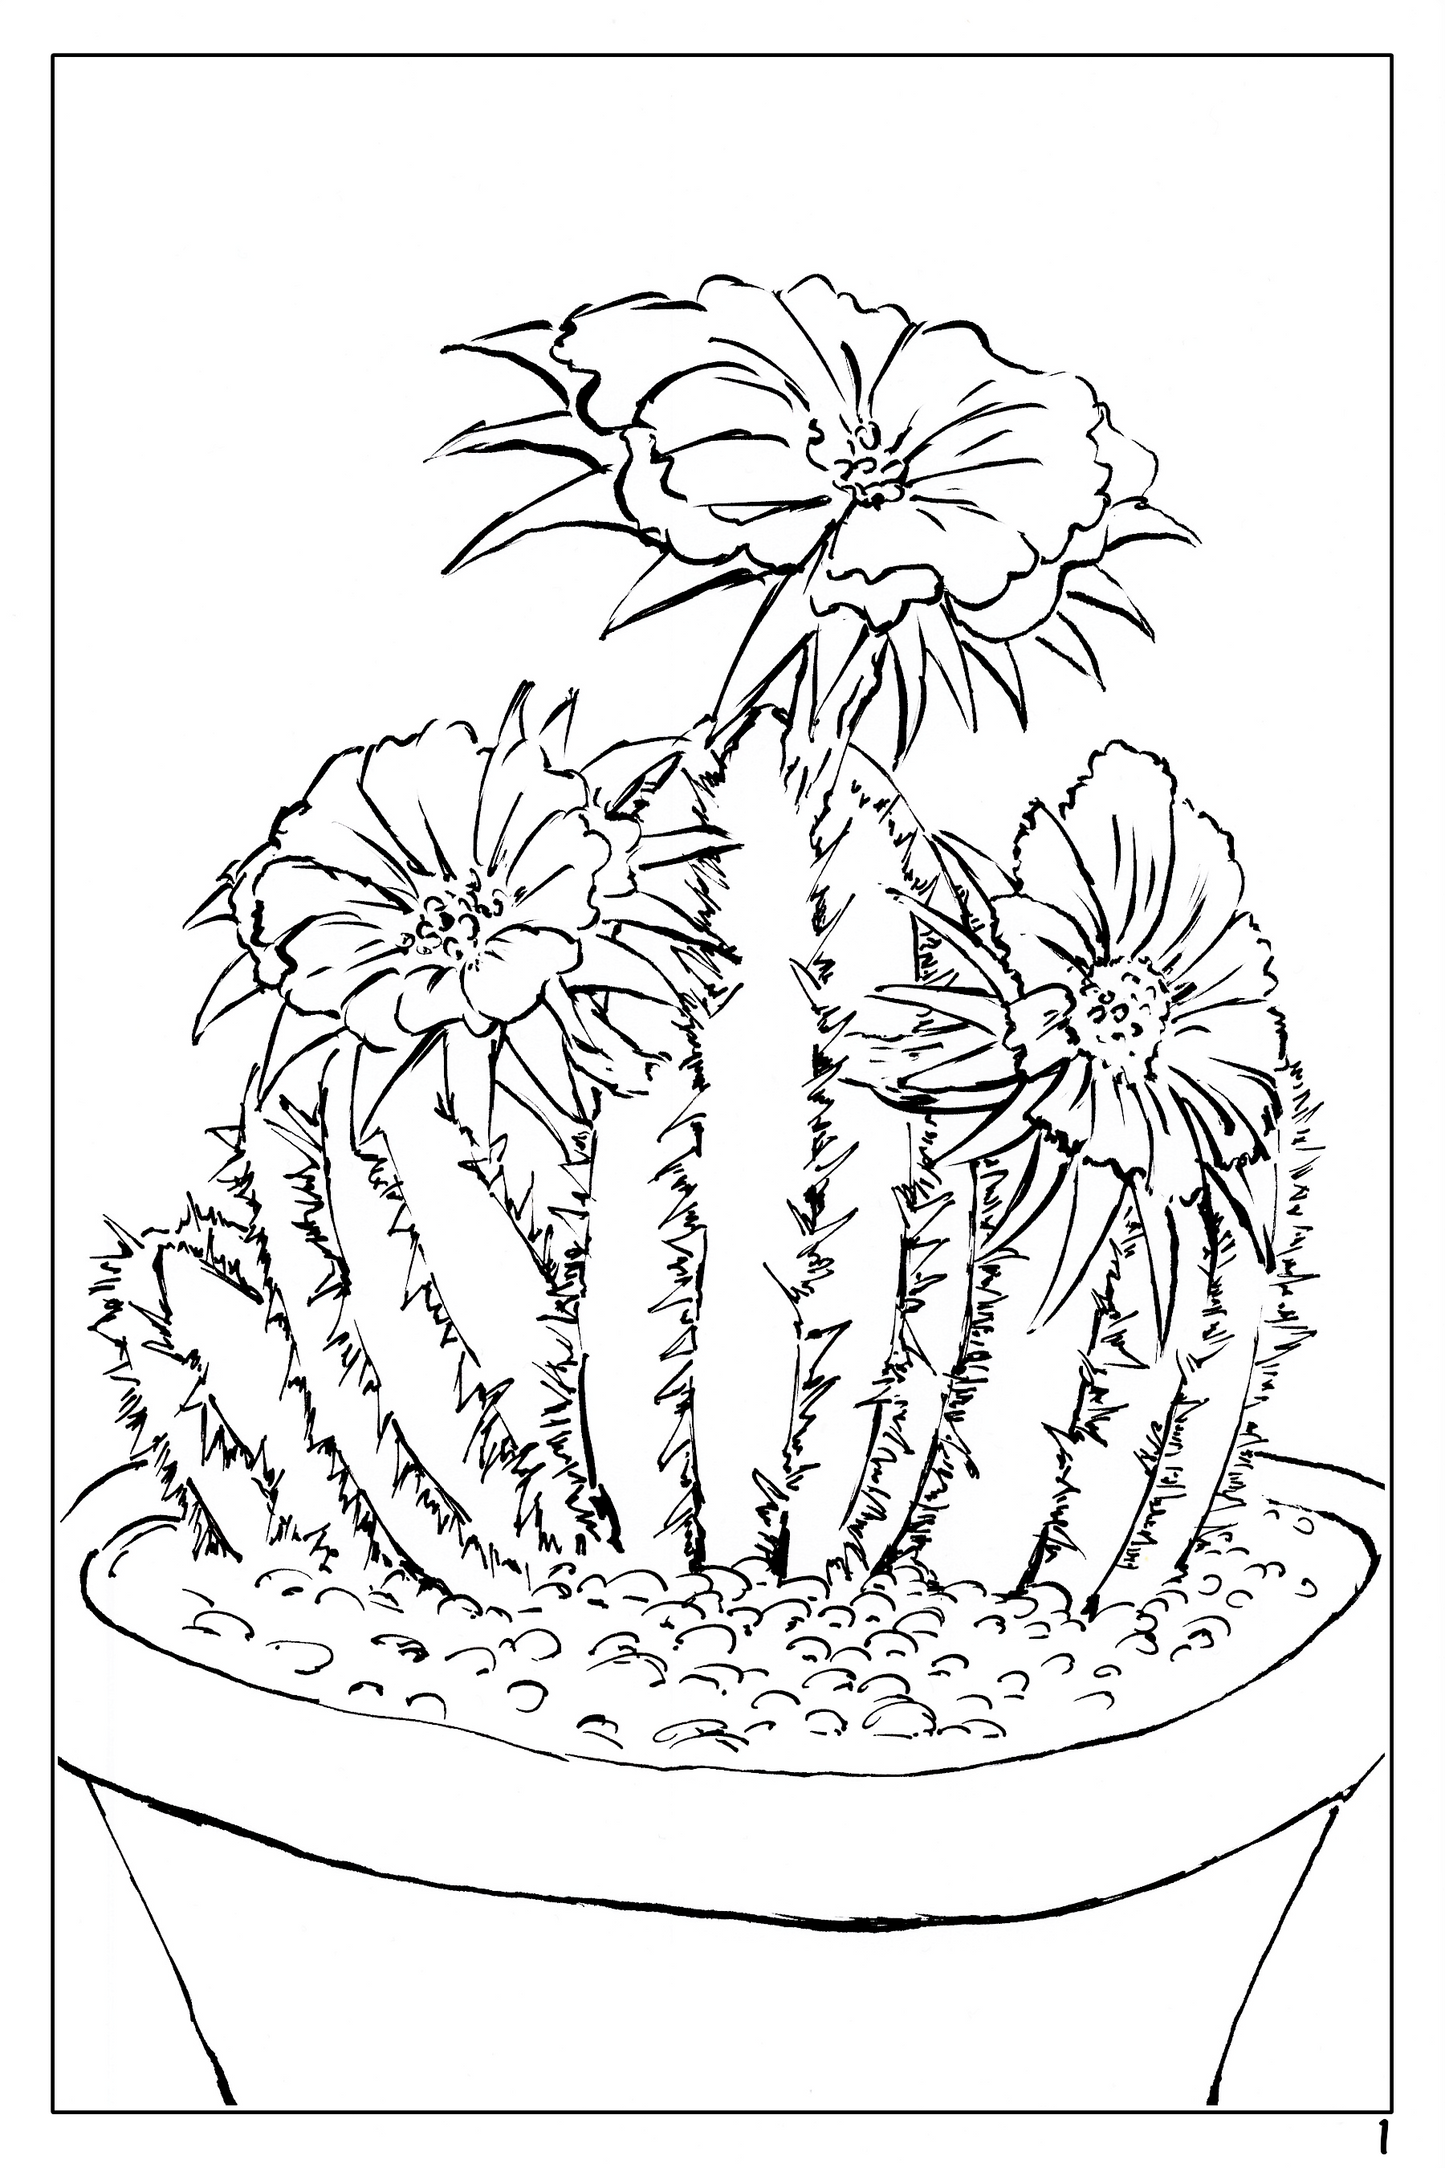 Plants and Flowers themed watercolor coloring book